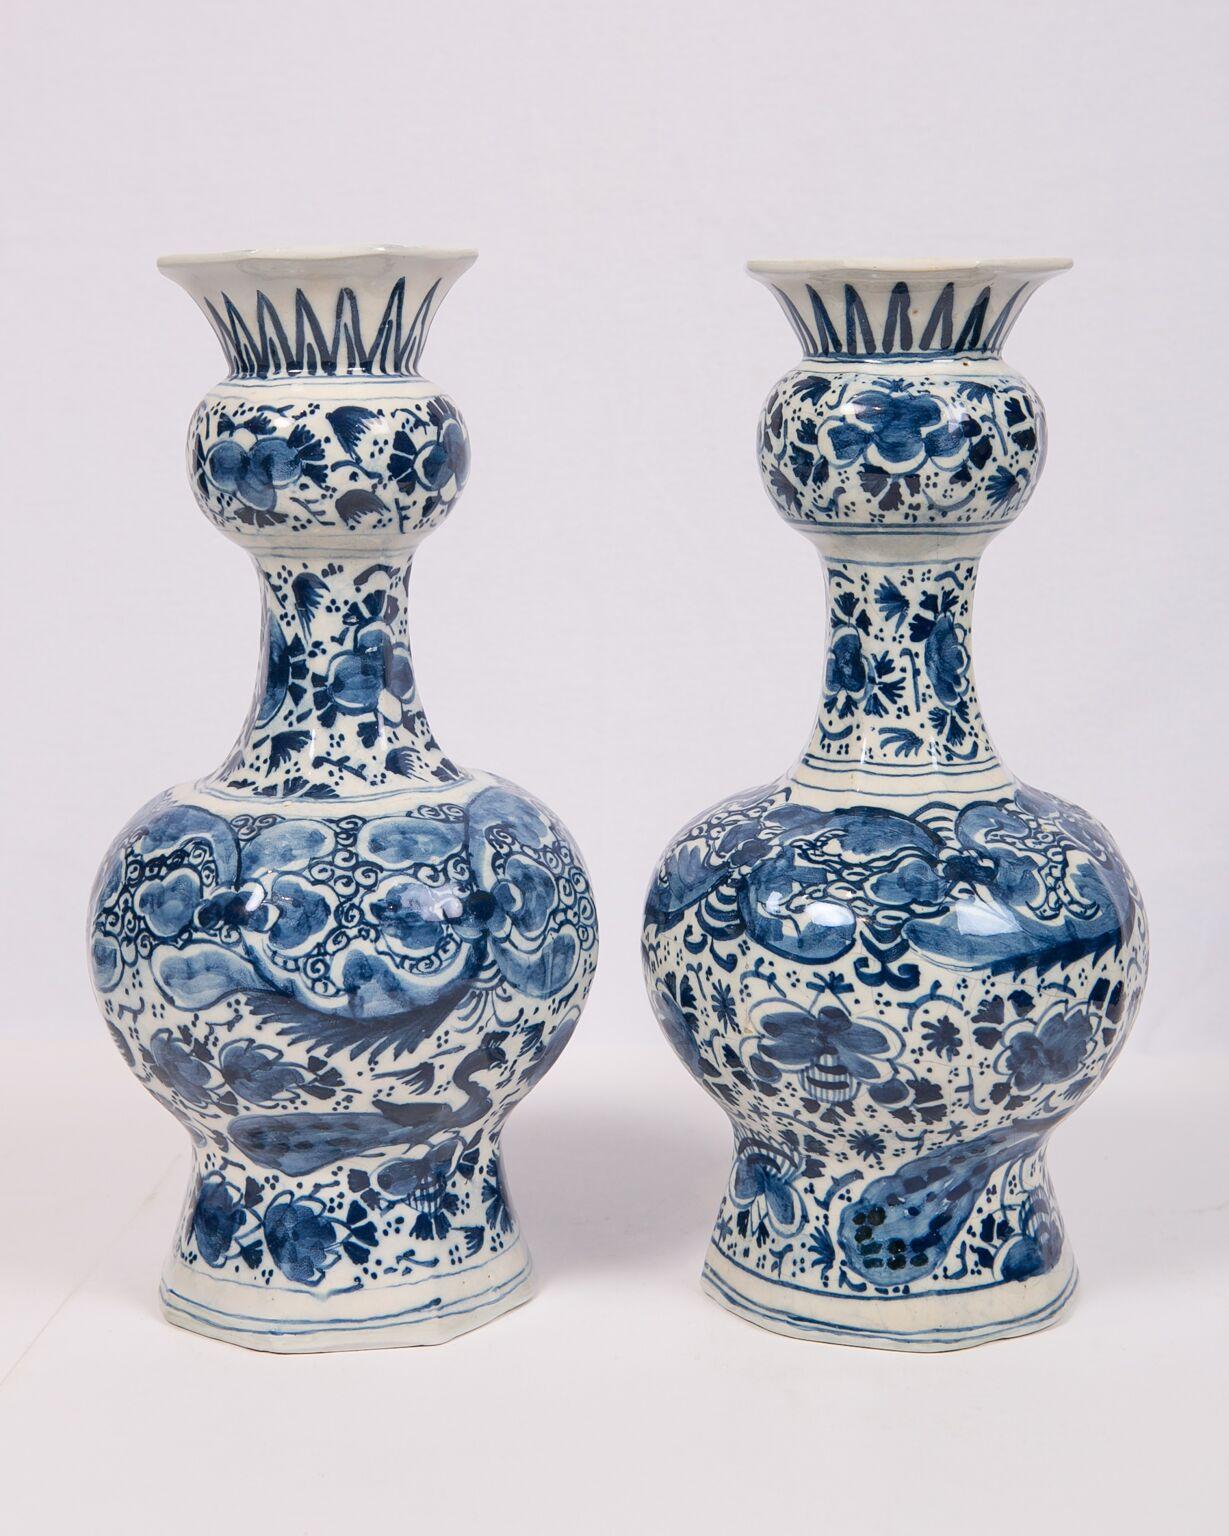 We are pleased to offer this pair of blue and white Dutch Delft vases painted in deep cobalt blue. Each vase is beautifully decorated with an all around design showing peacocks and a variety of flowers. The rounded octagonal shape of the vases is a